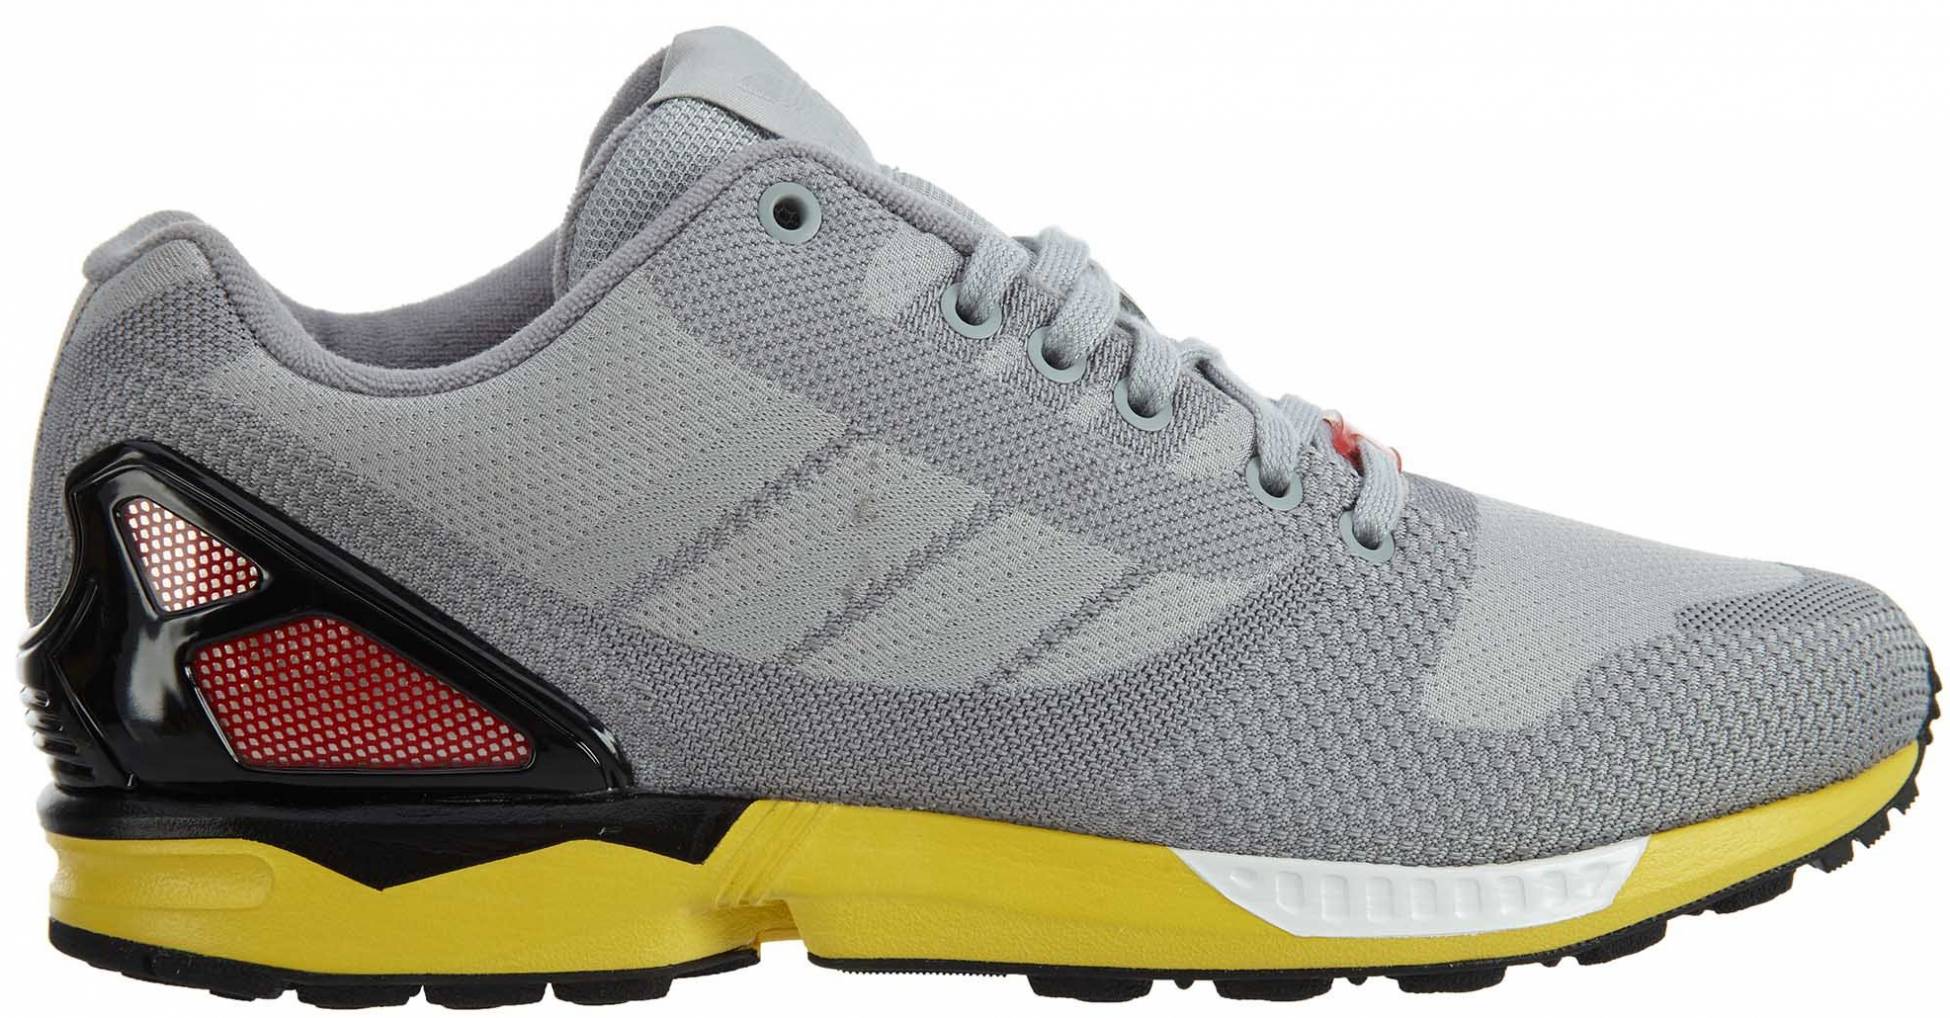 class lethal Donation Adidas ZX Flux Weave sneakers in 3 colors (only $55) | RunRepeat